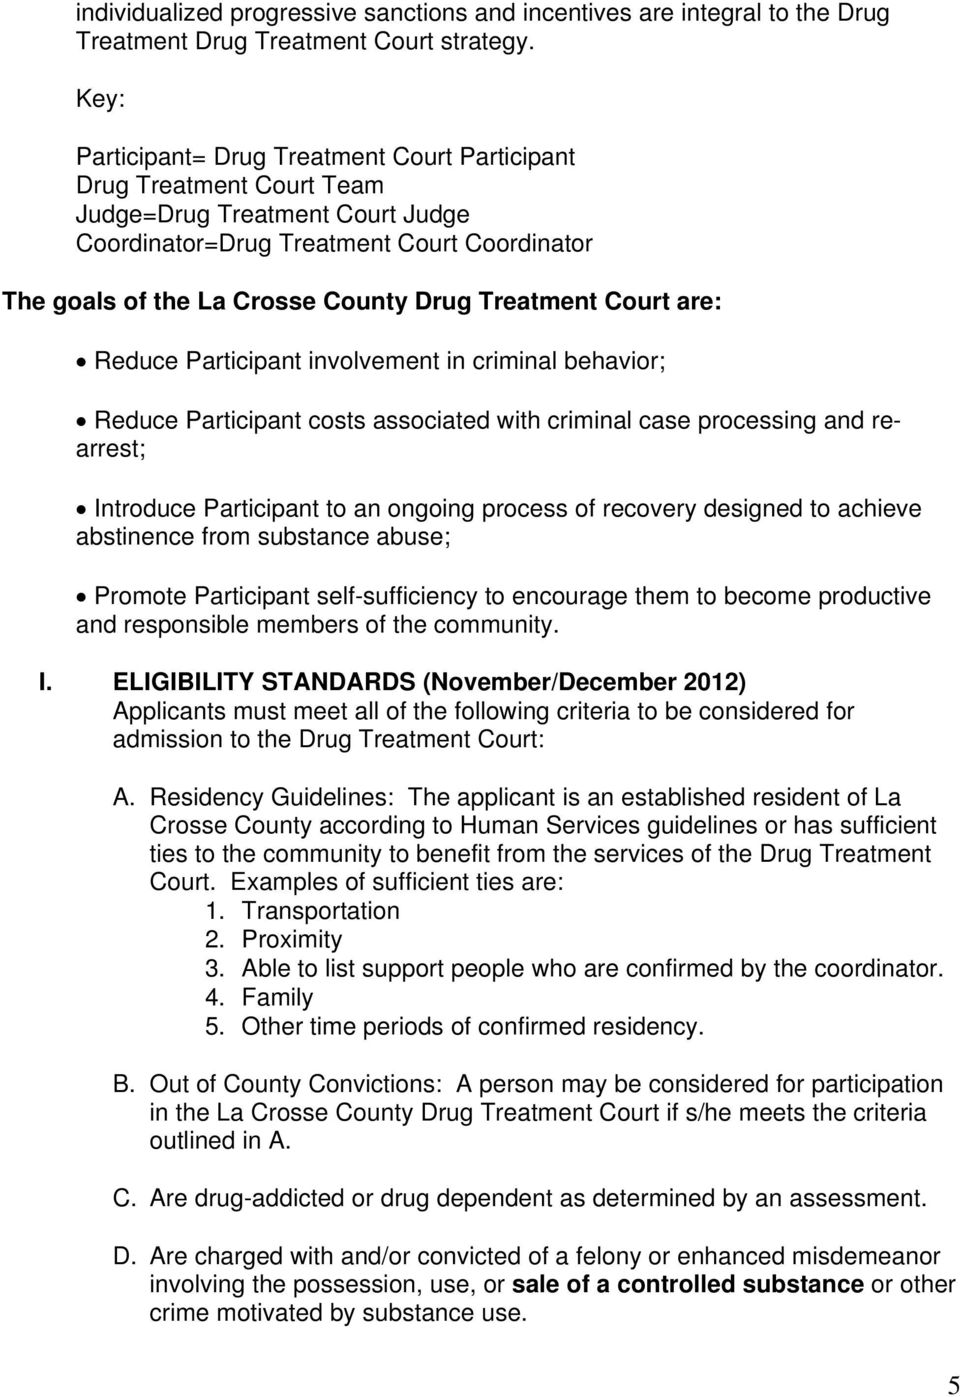 Treatment Court are: Reduce Participant involvement in criminal behavior; Reduce Participant costs associated with criminal case processing and rearrest; Introduce Participant to an ongoing process